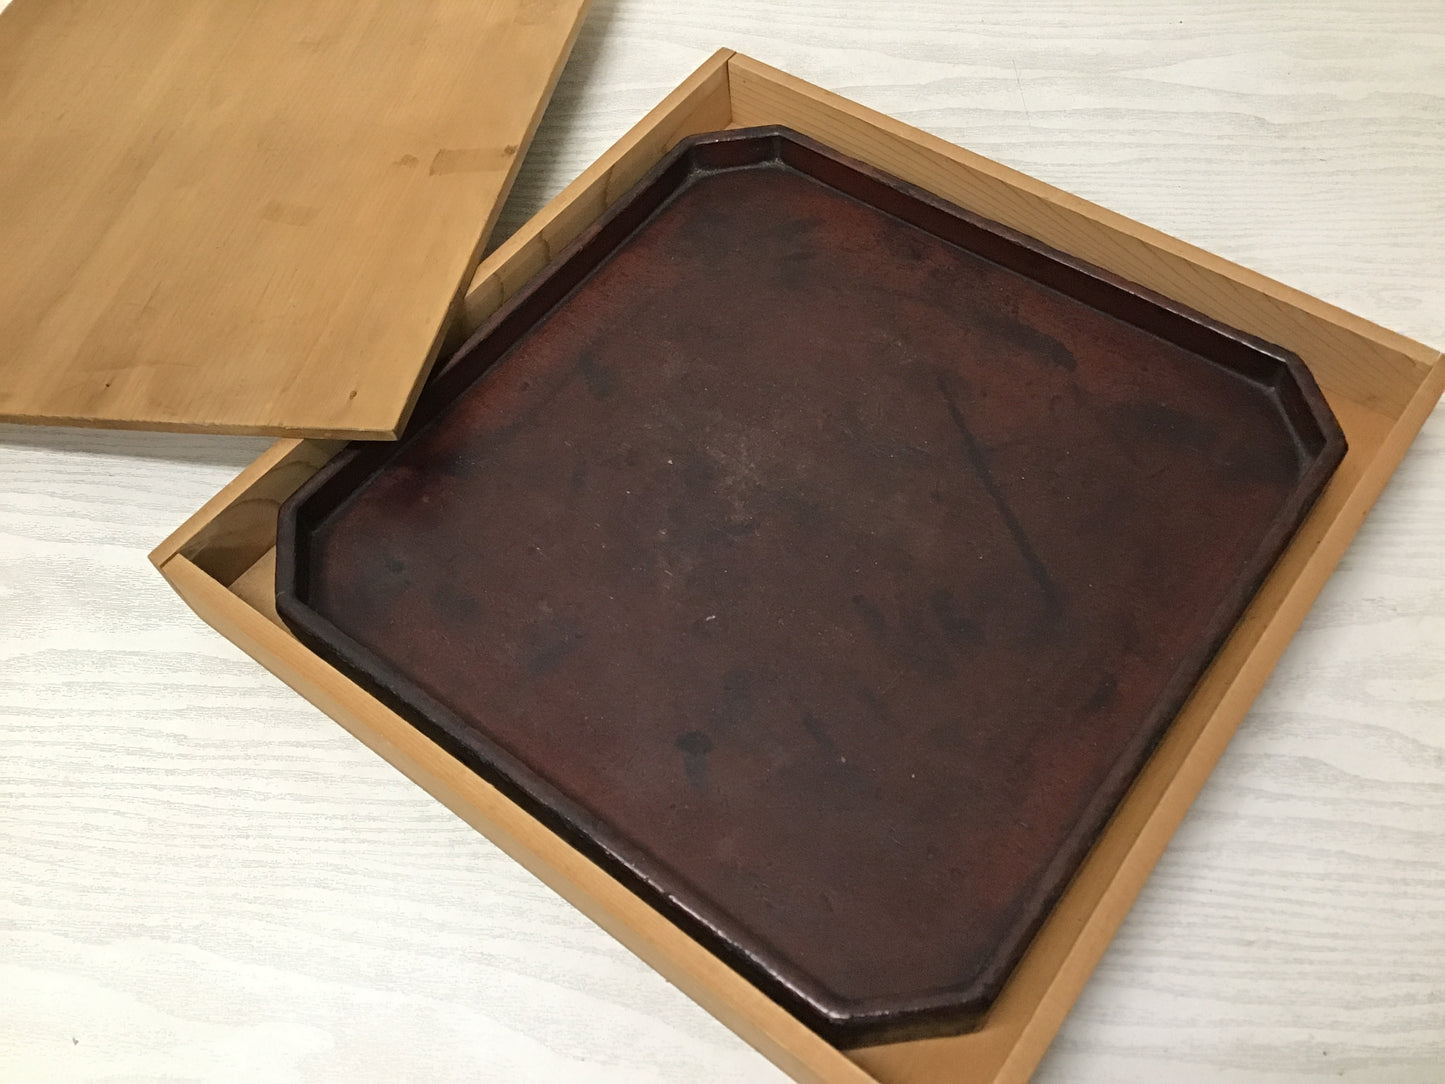 Y2426 TRAY Negoro lacquerware splayed OBON OZEN signed box Japan antique vintage